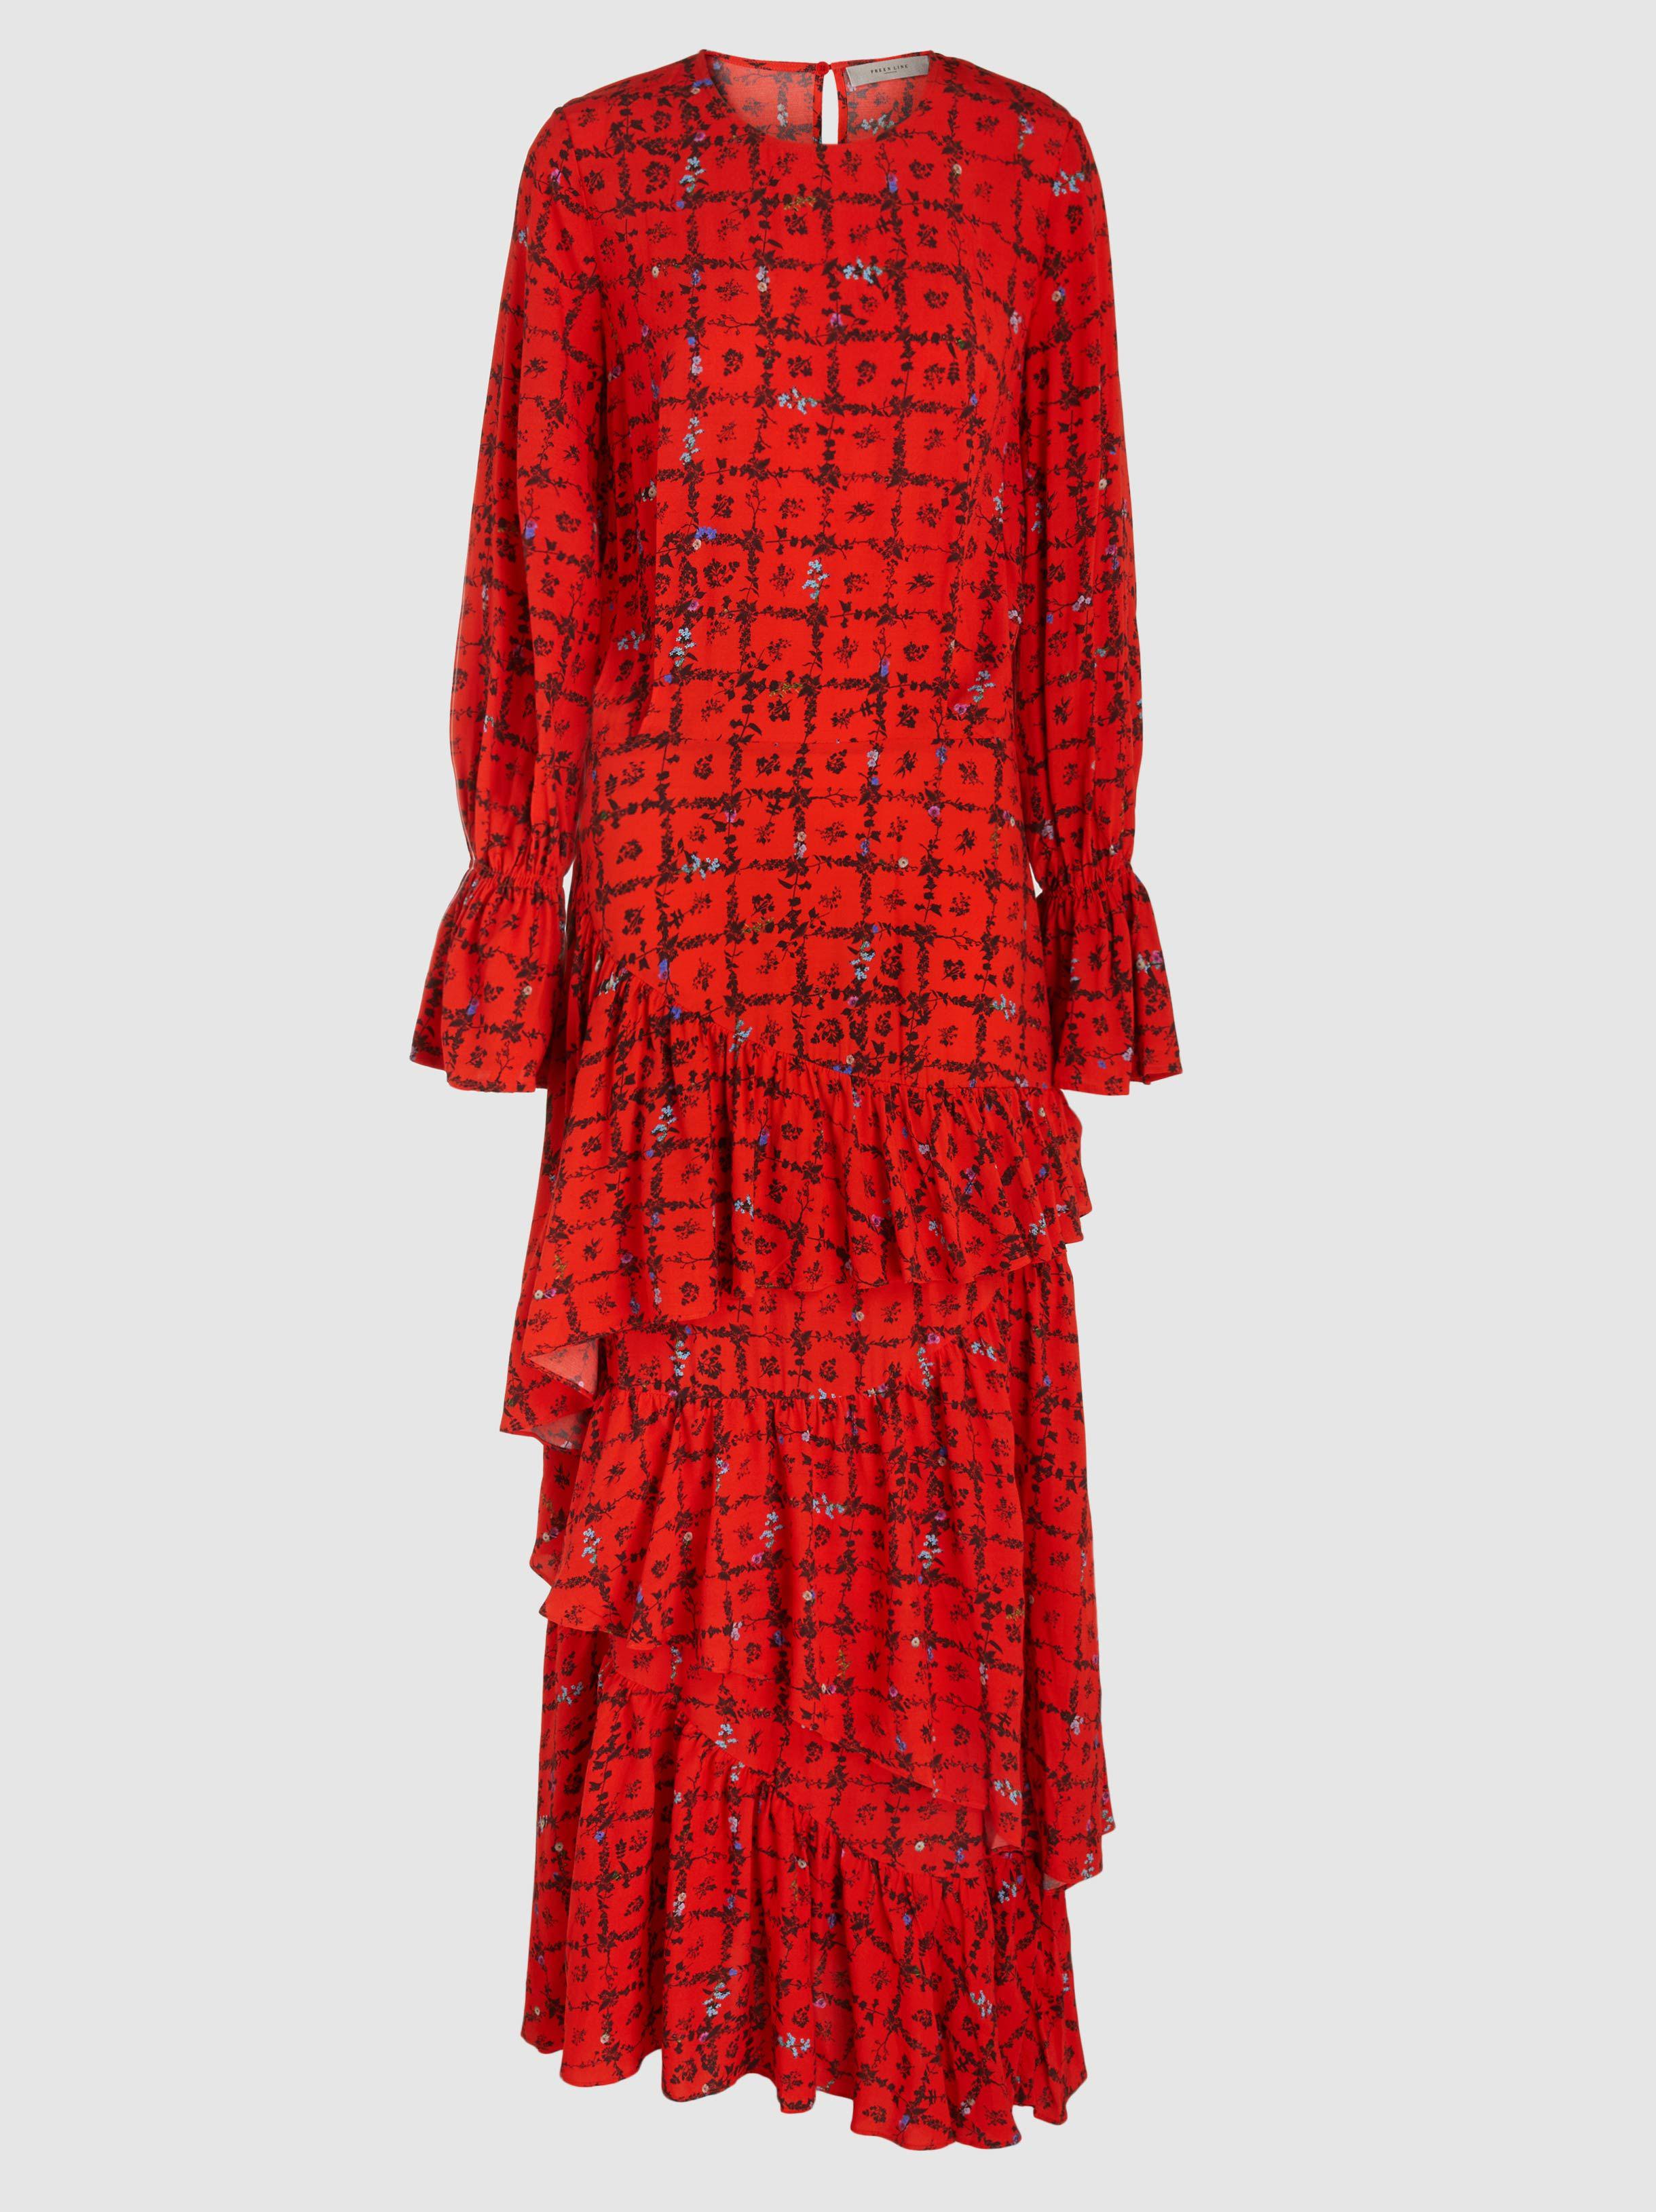 Preen Line Rylee Printed Tiered Crepe Maxi Dress in Red - Lyst